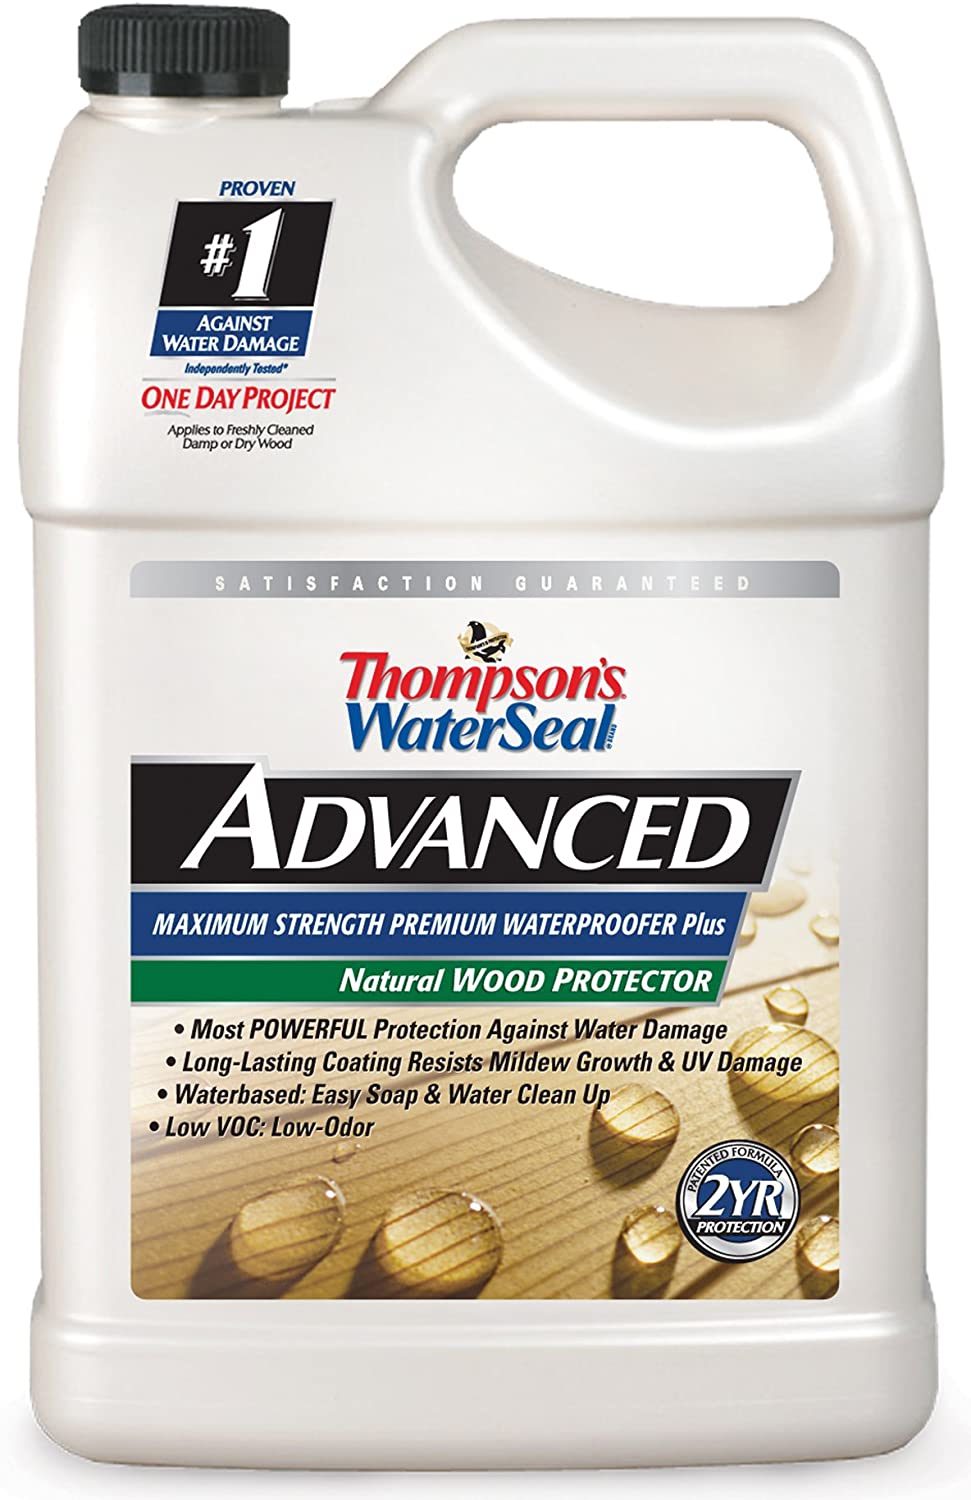 Thompsons WaterSeal Advanced